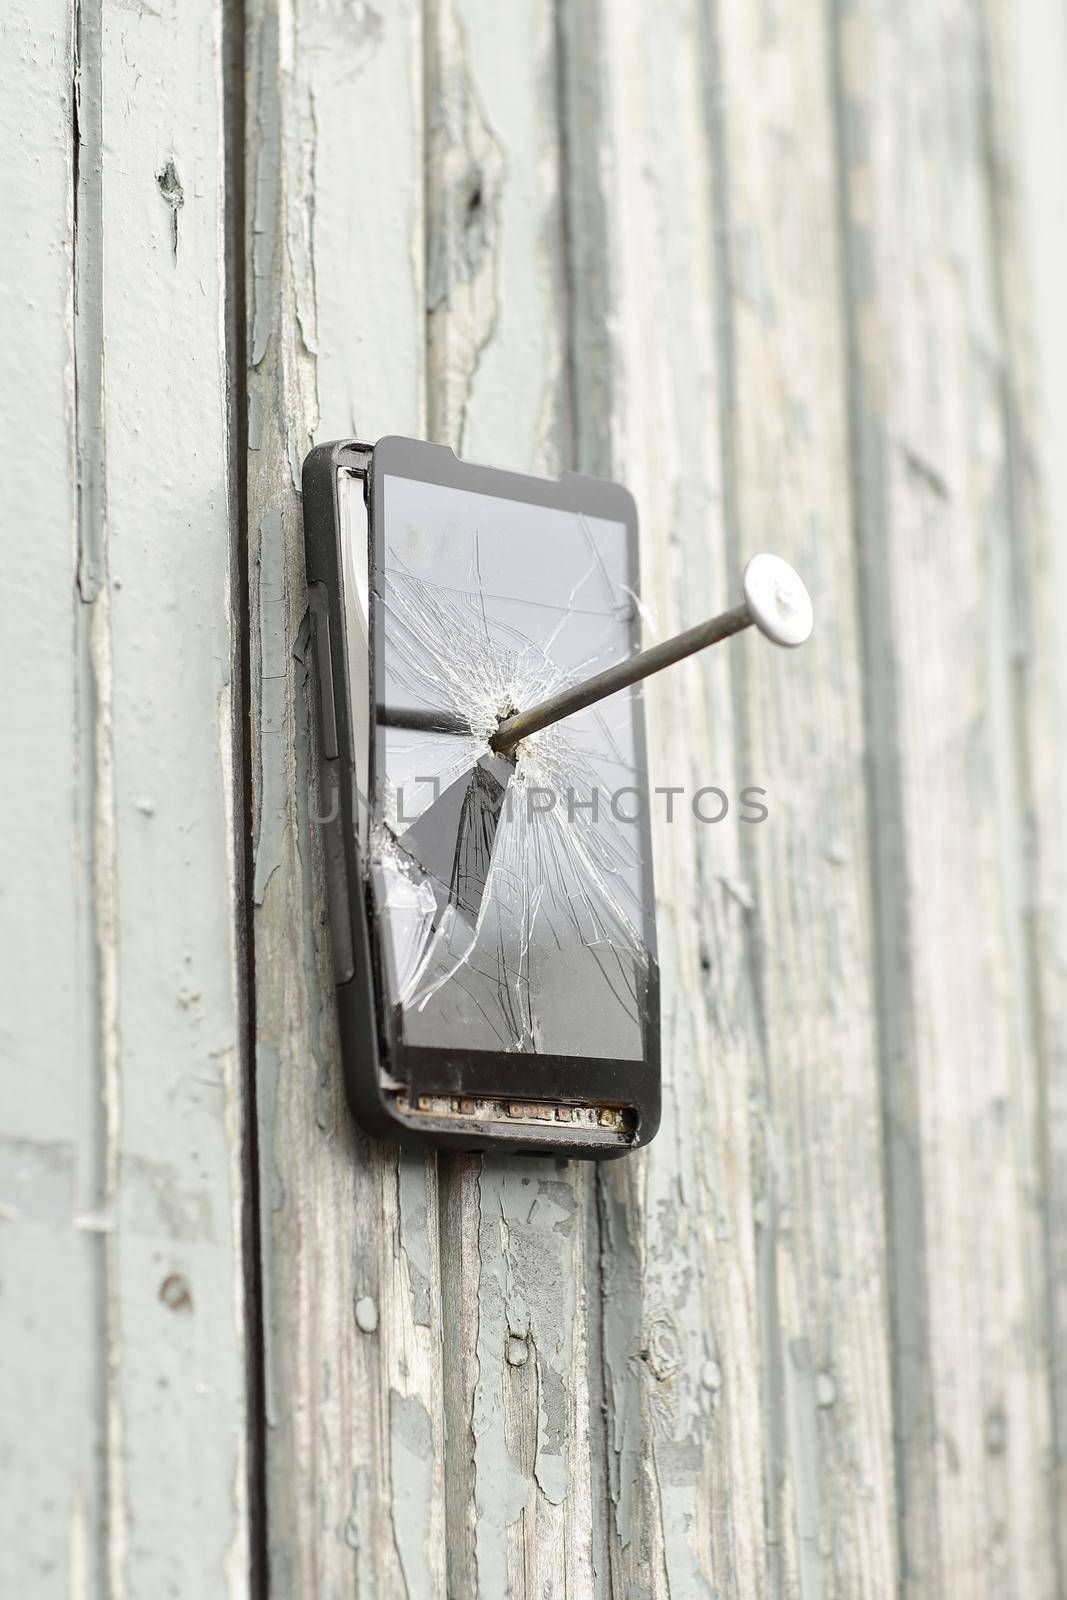 faulty mobile phone is nailed to an old fence by SmartPhotoLab